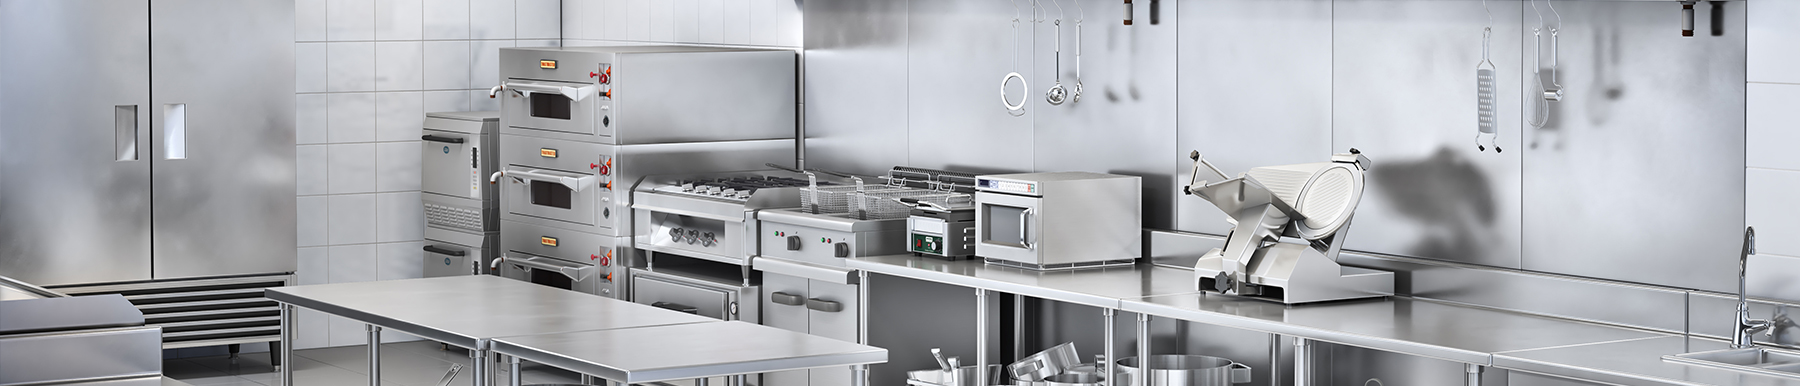 Catering Equipment Suppliers Near East Ayrshire | H2 Catering Equipment Catering Equipment